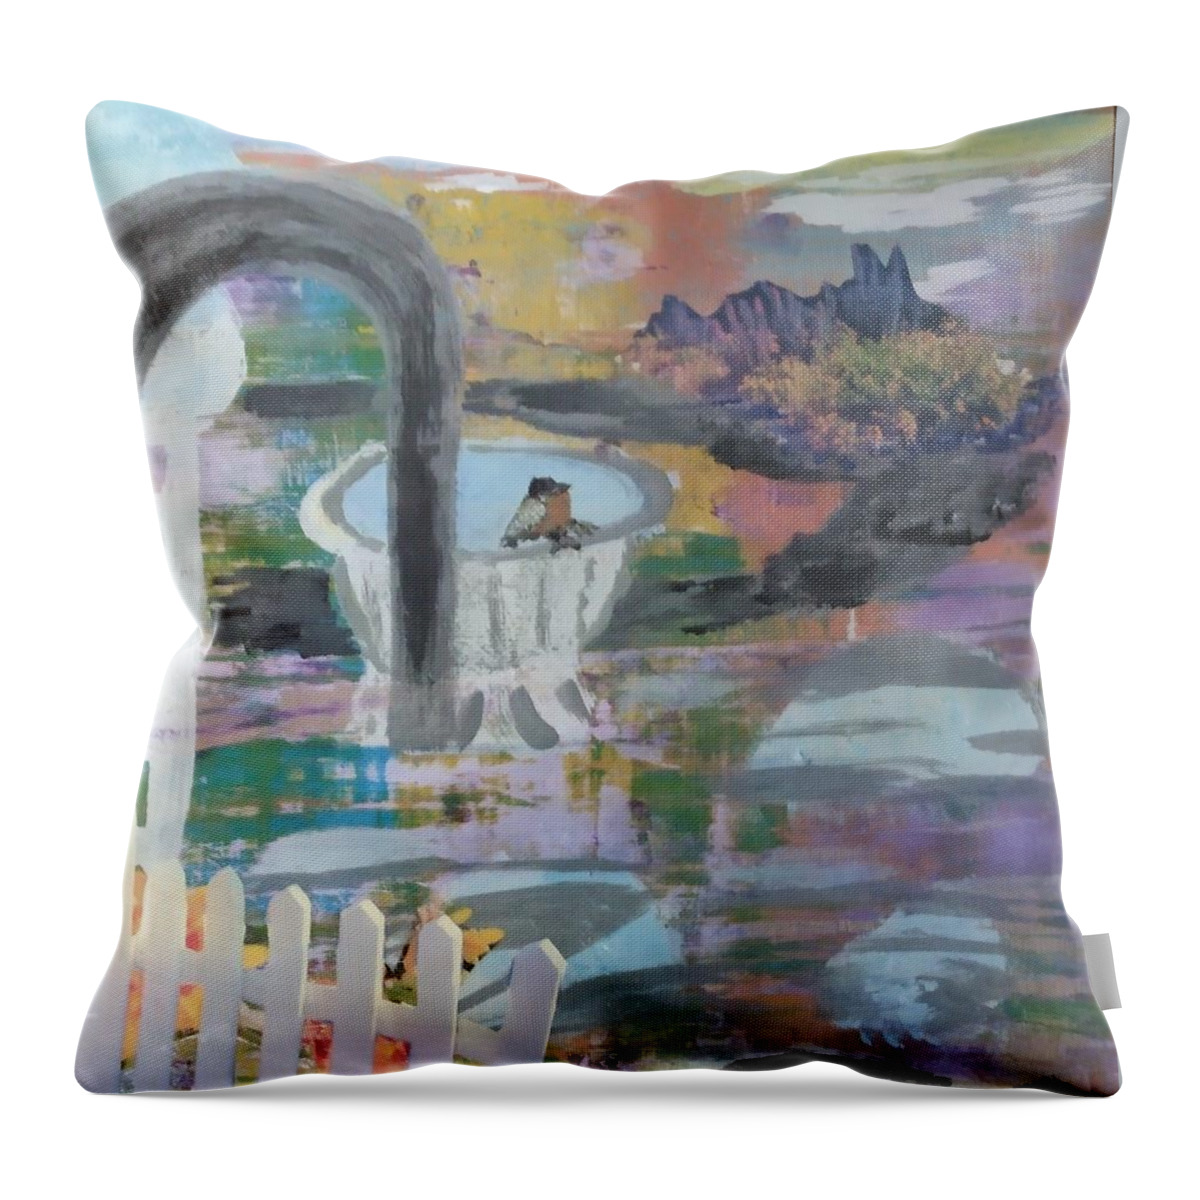 Garden Throw Pillow featuring the mixed media In the Garden by Suzanne Berthier